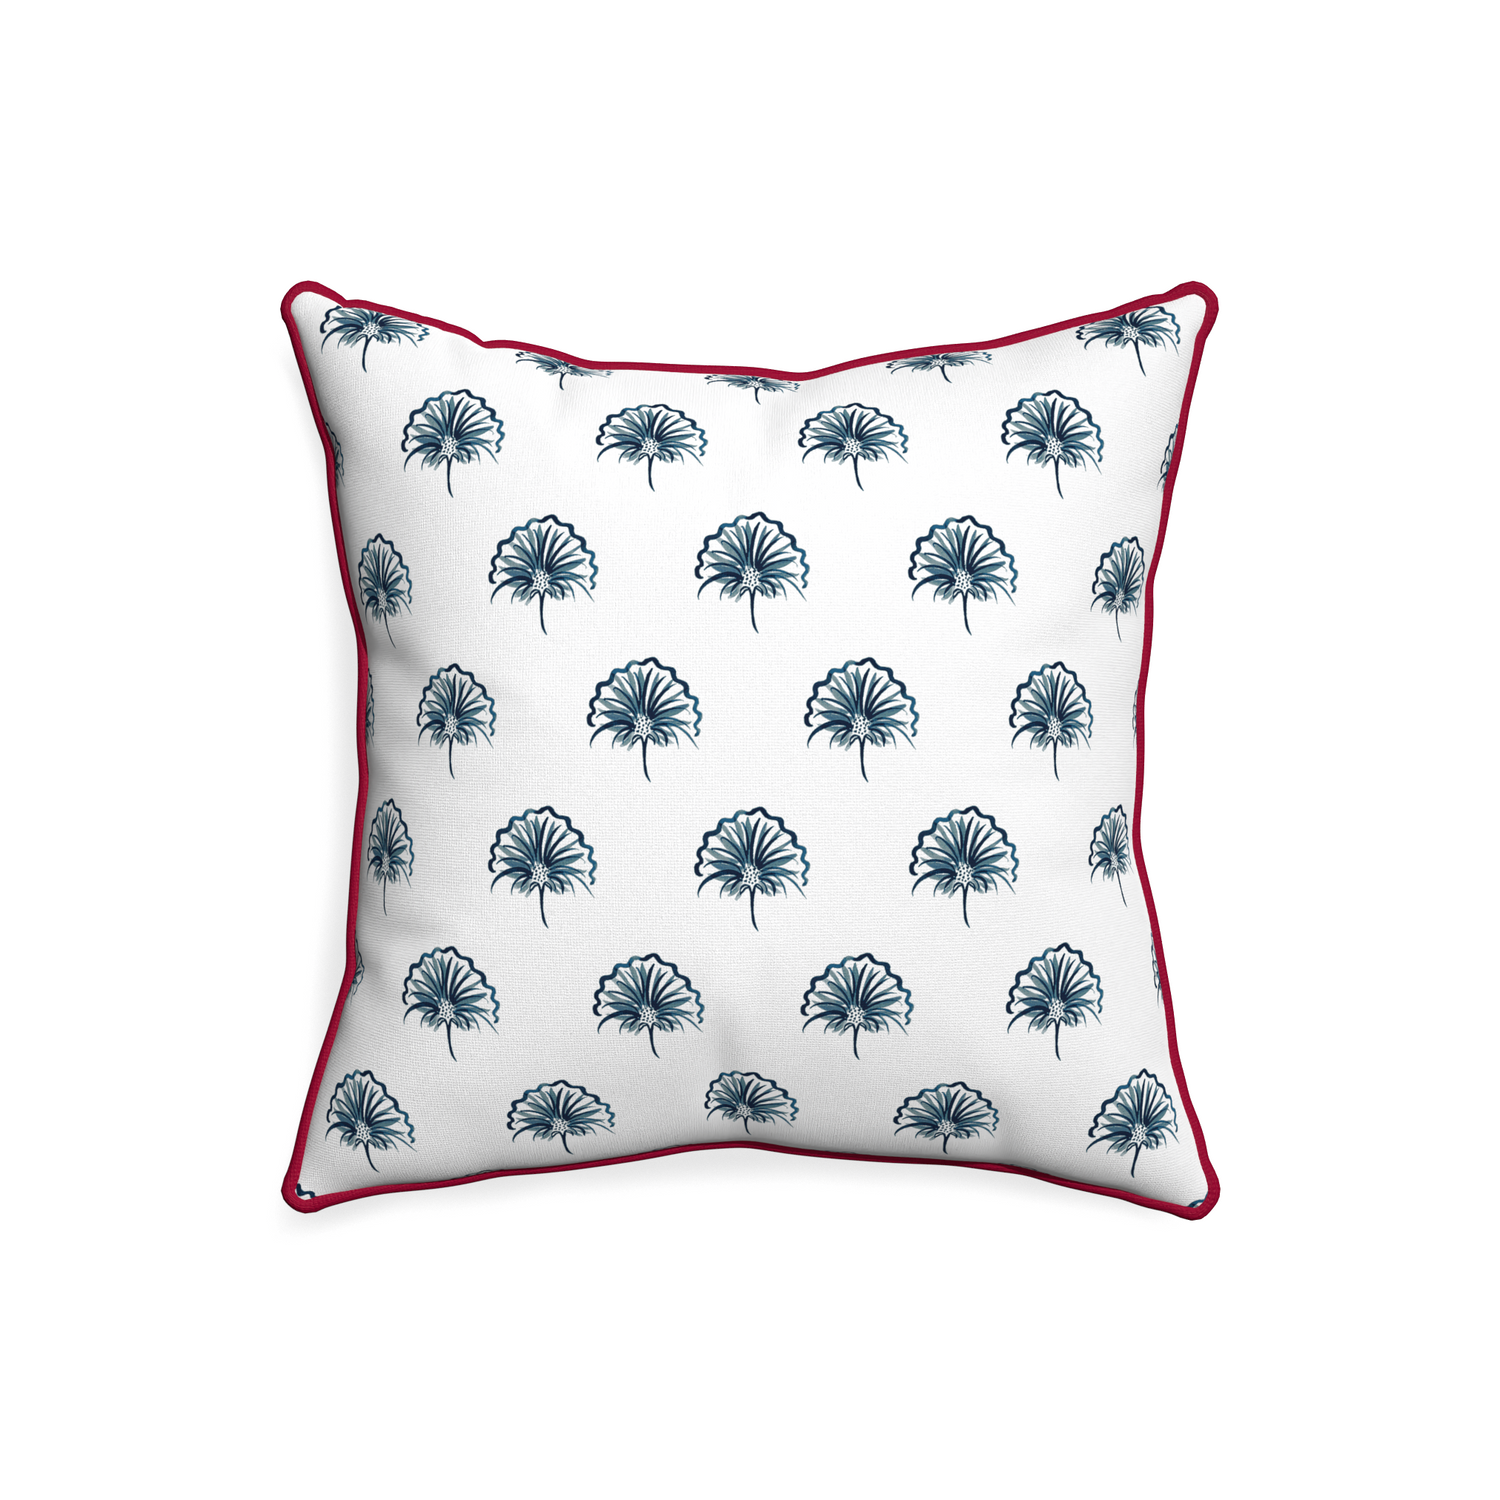 20-square penelope midnight custom pillow with raspberry piping on white background